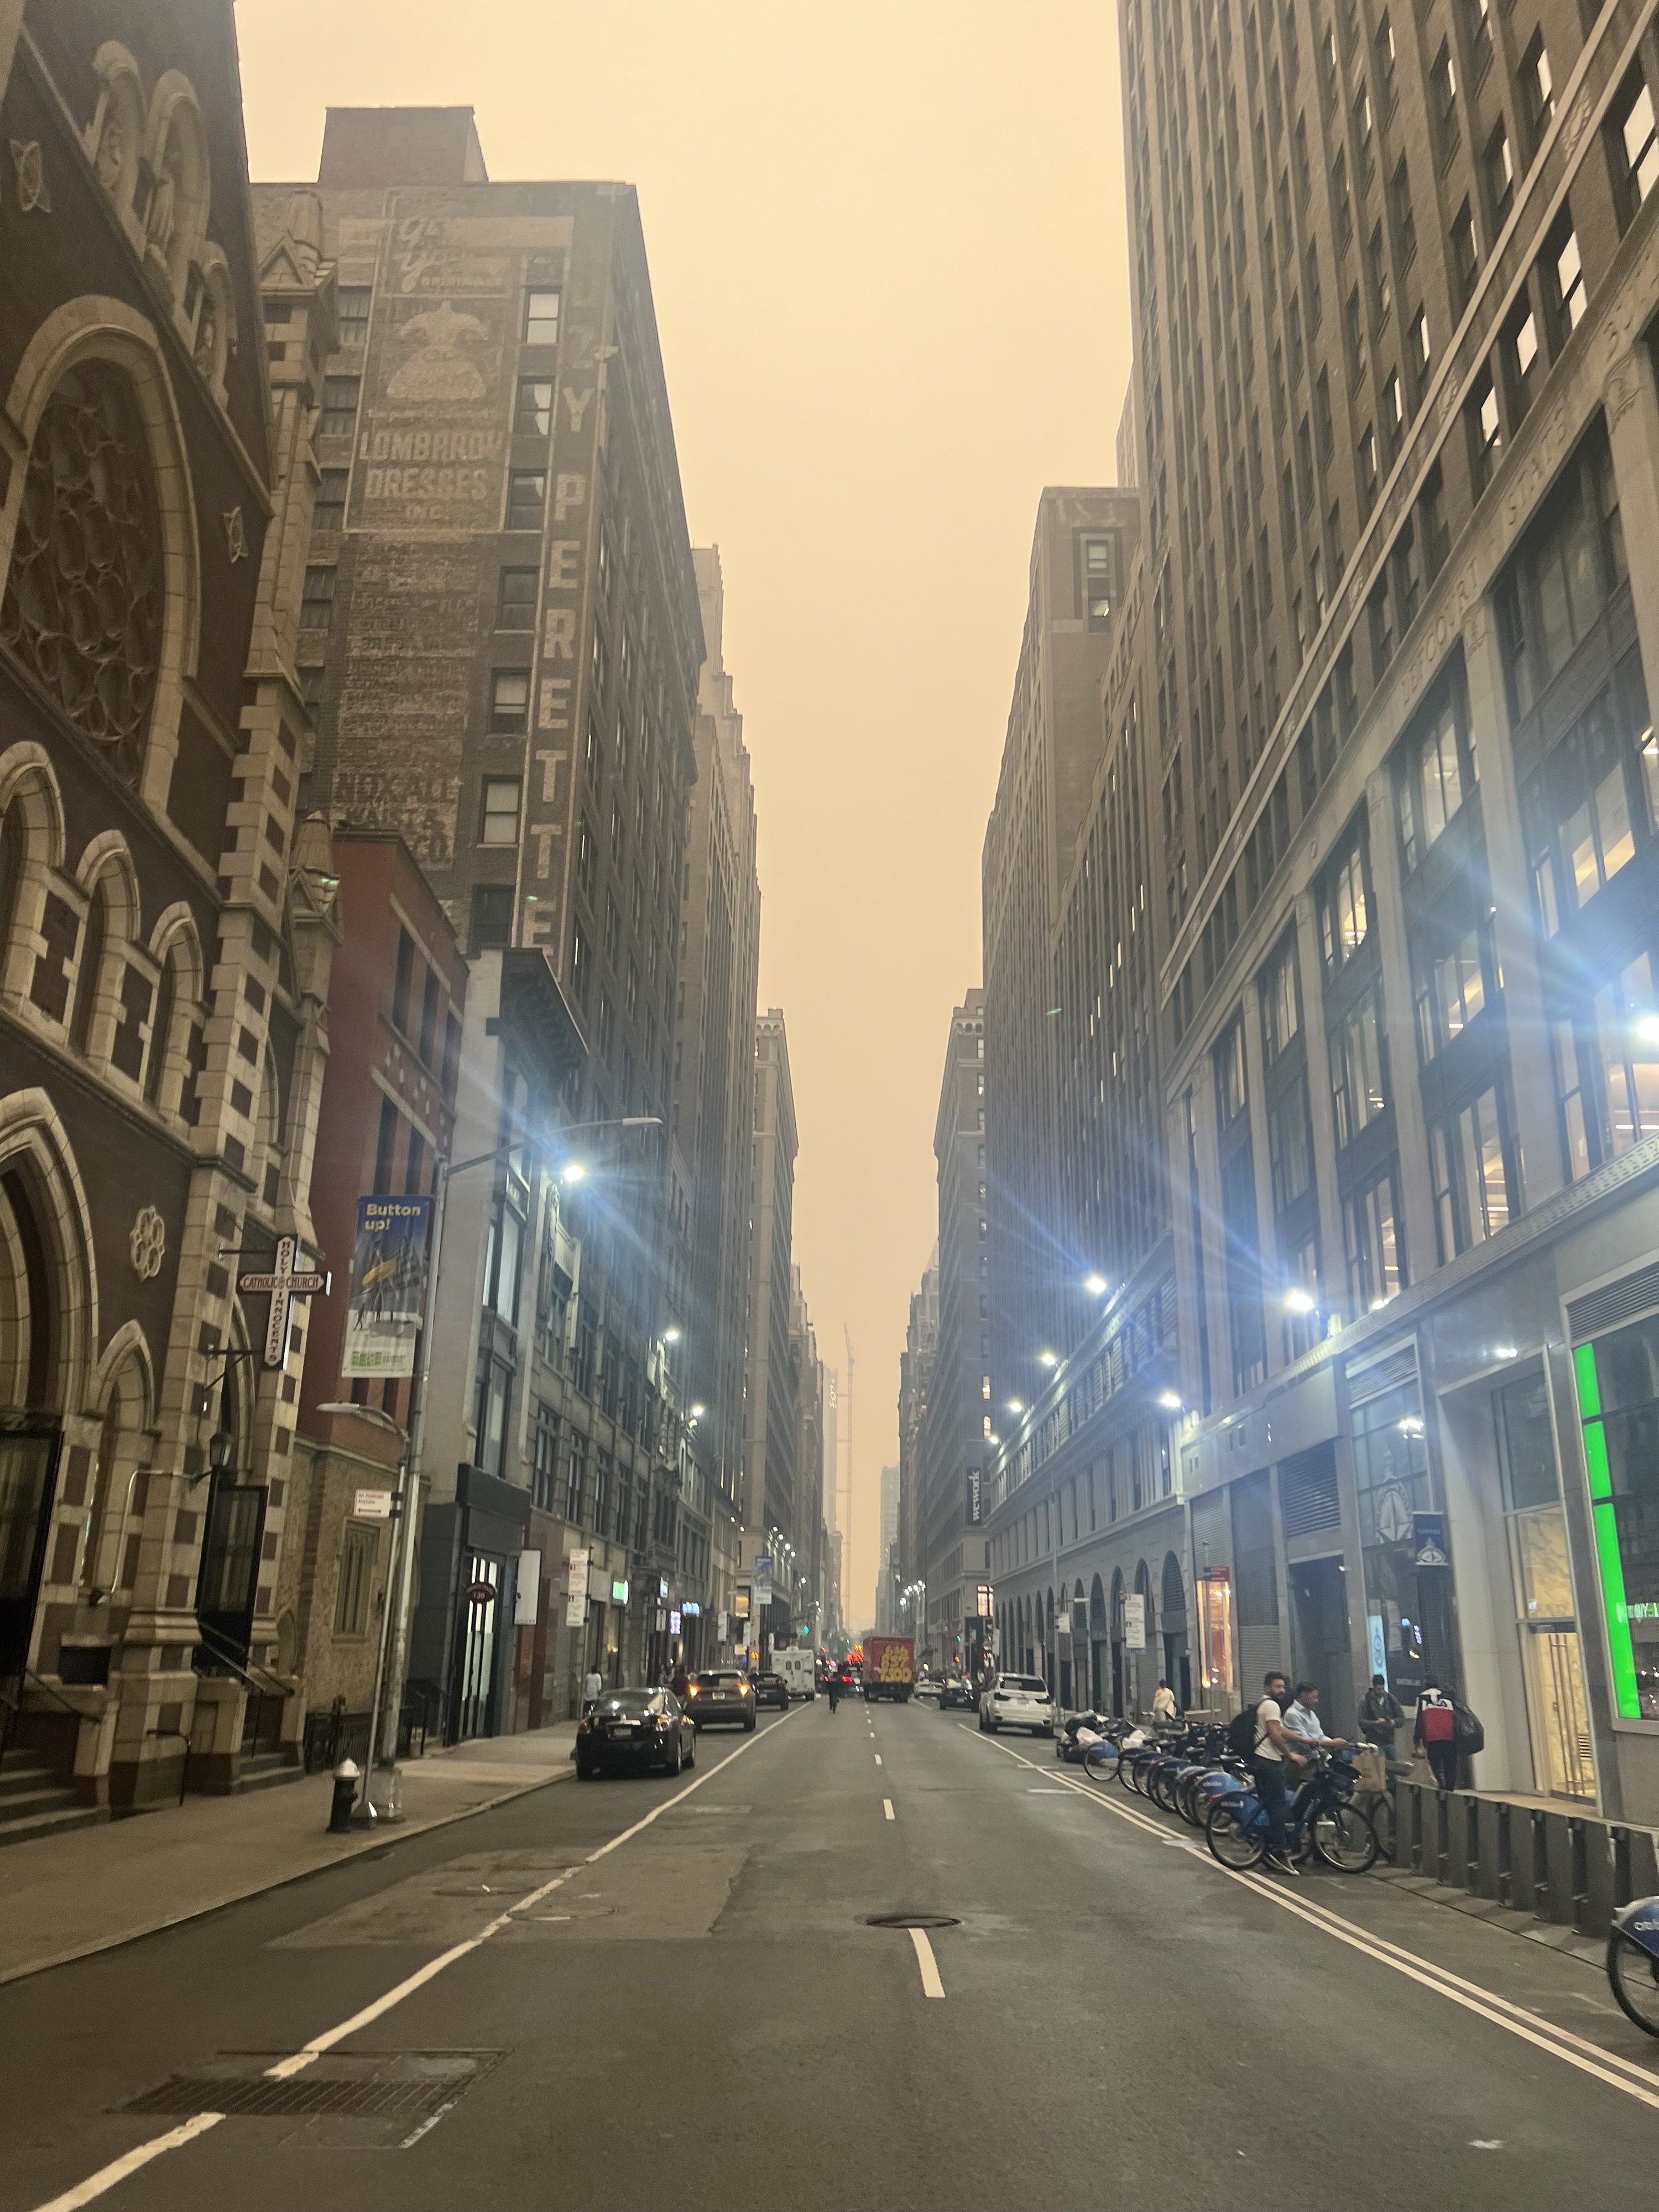 Several people on a Manhattan street with the foggy sky in the background